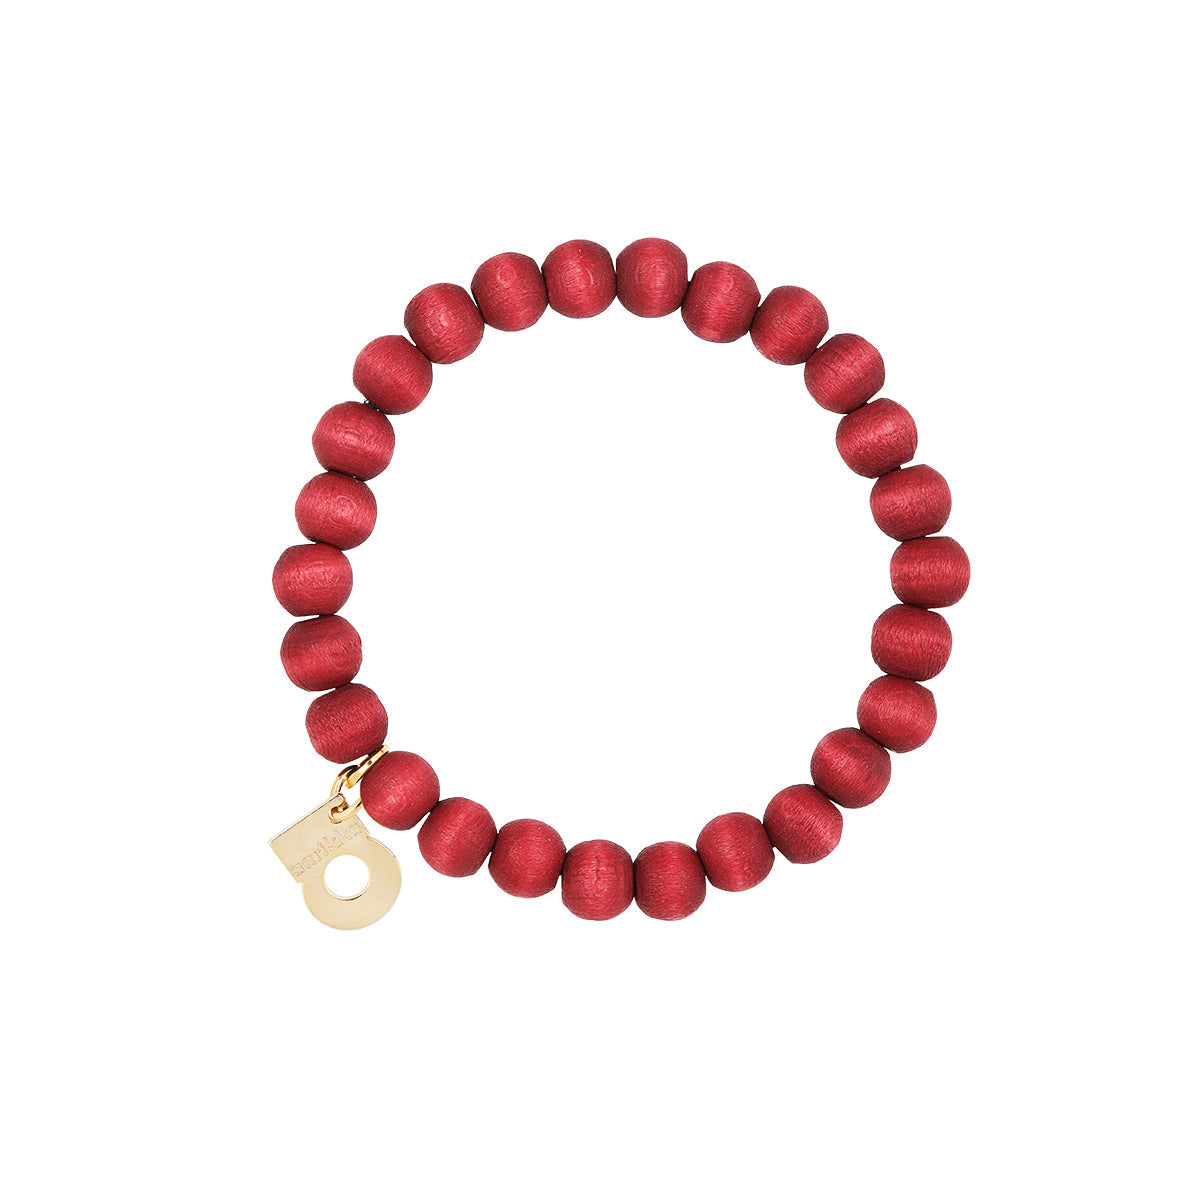 Ariel bracelet, wine red and gold